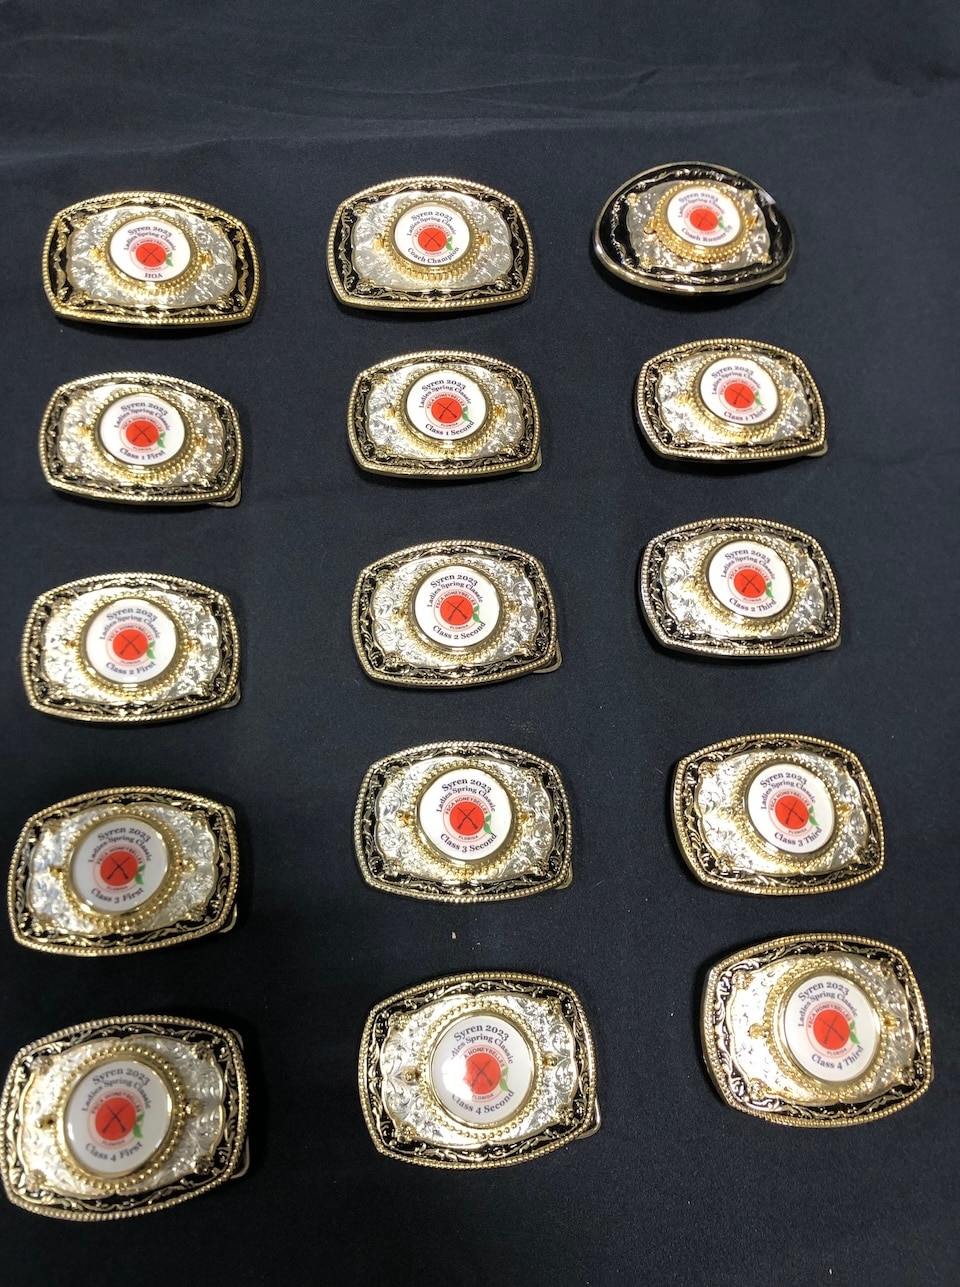 Buckles from Syren to be awarded at Ladies Spring Classic FSCA Honeybelles